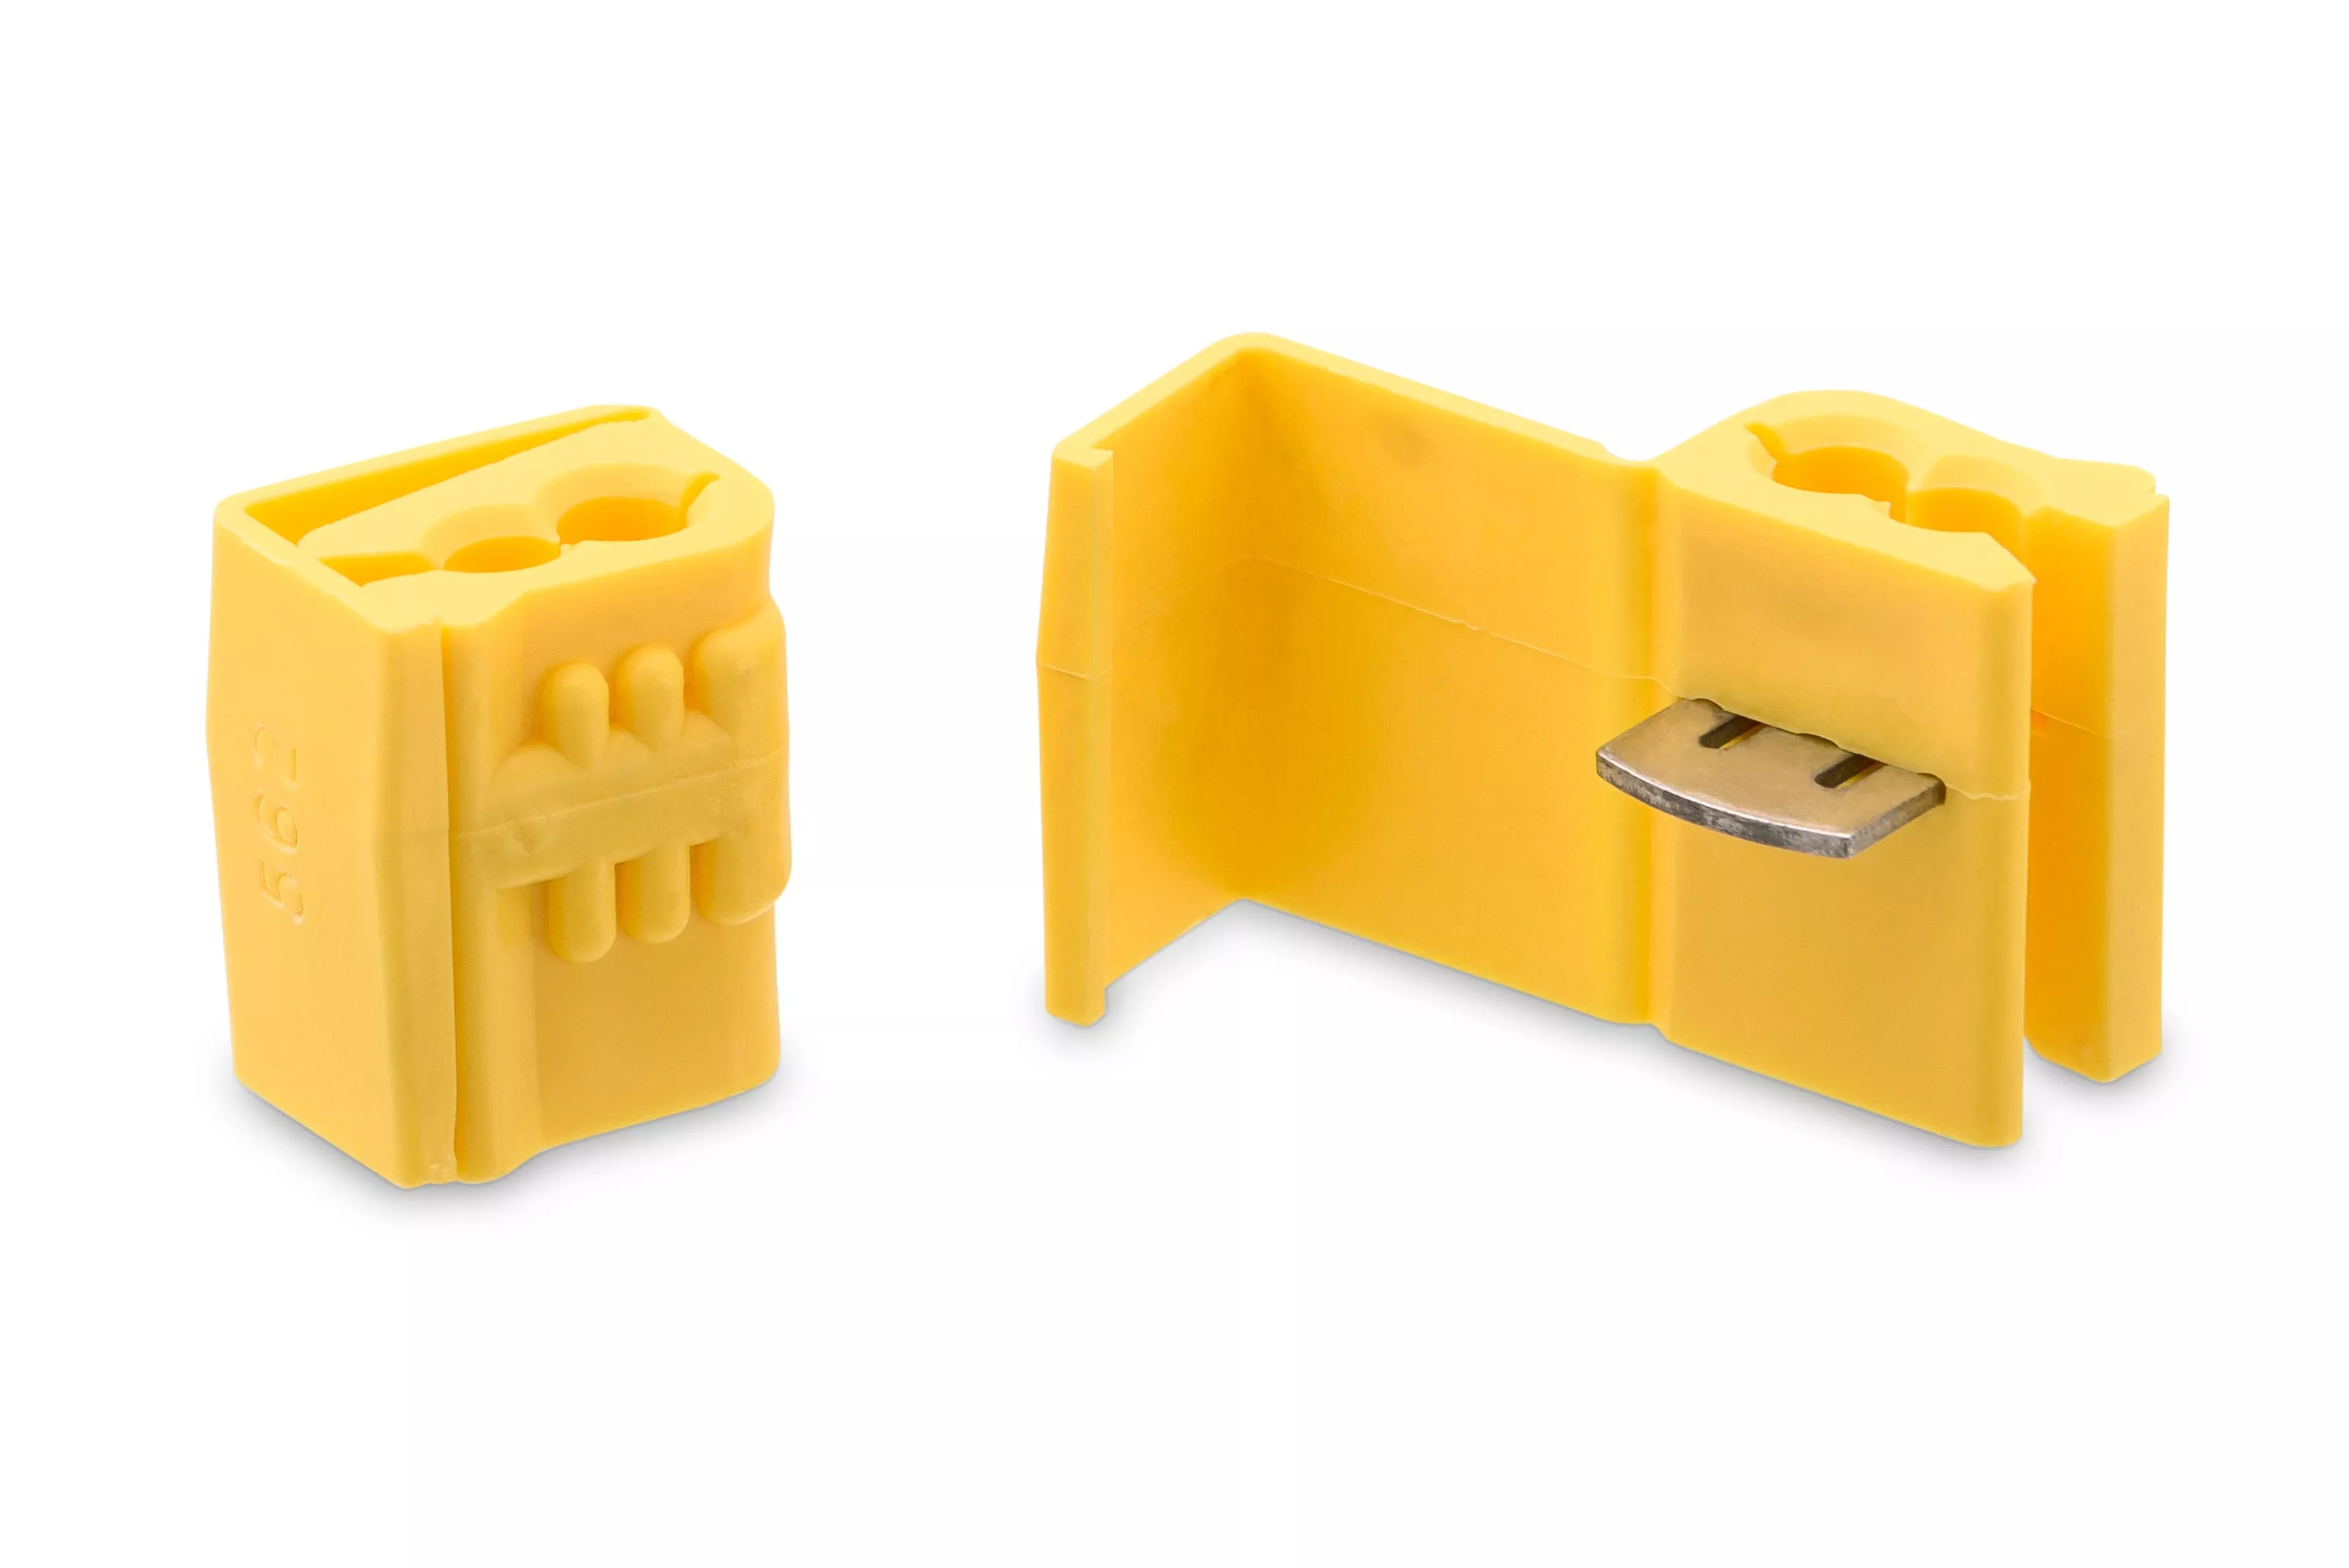 3M™ Scotchlok™ Electrical IDC 562-BIN, Yellow, 12 AWG (solid/stranded),
10 AWG (stranded), 1000 /Case